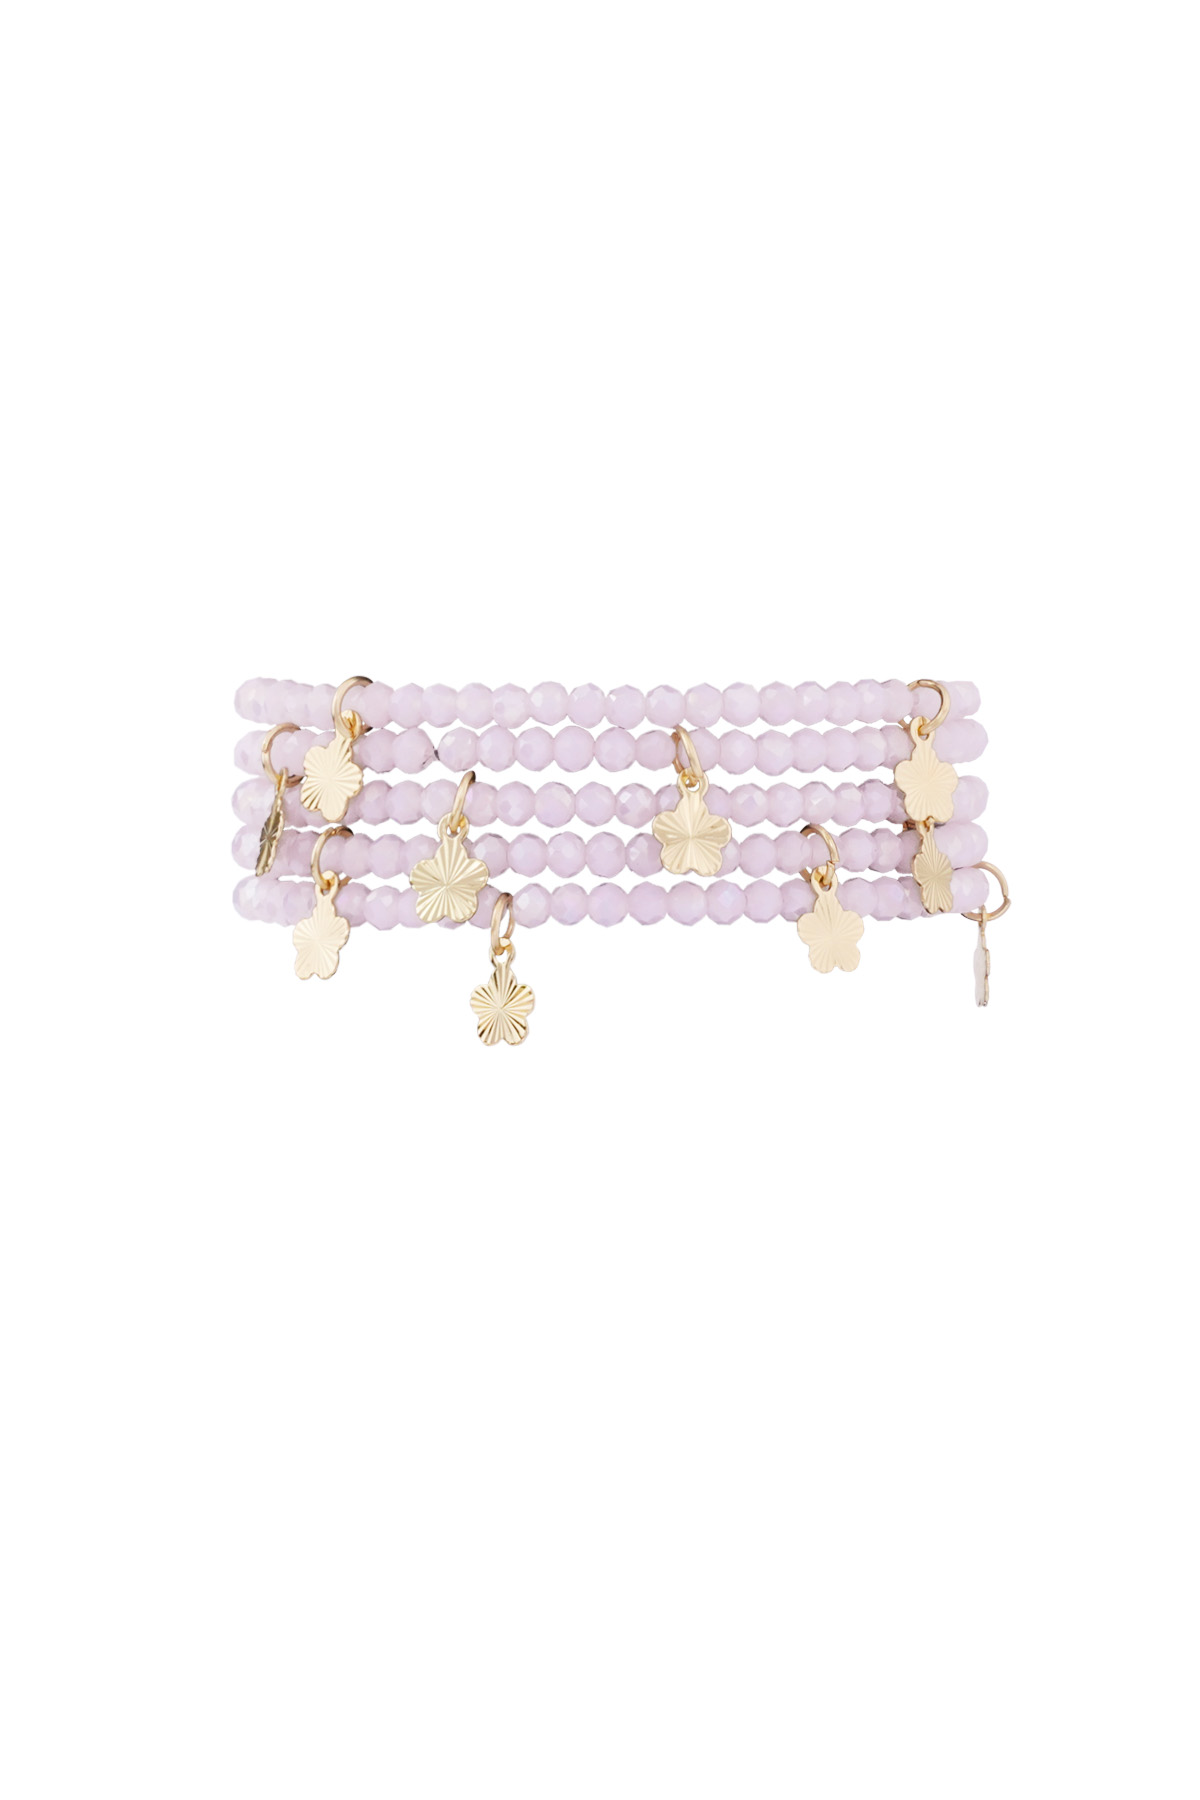 Double bracelet with flower charms - pink/gold